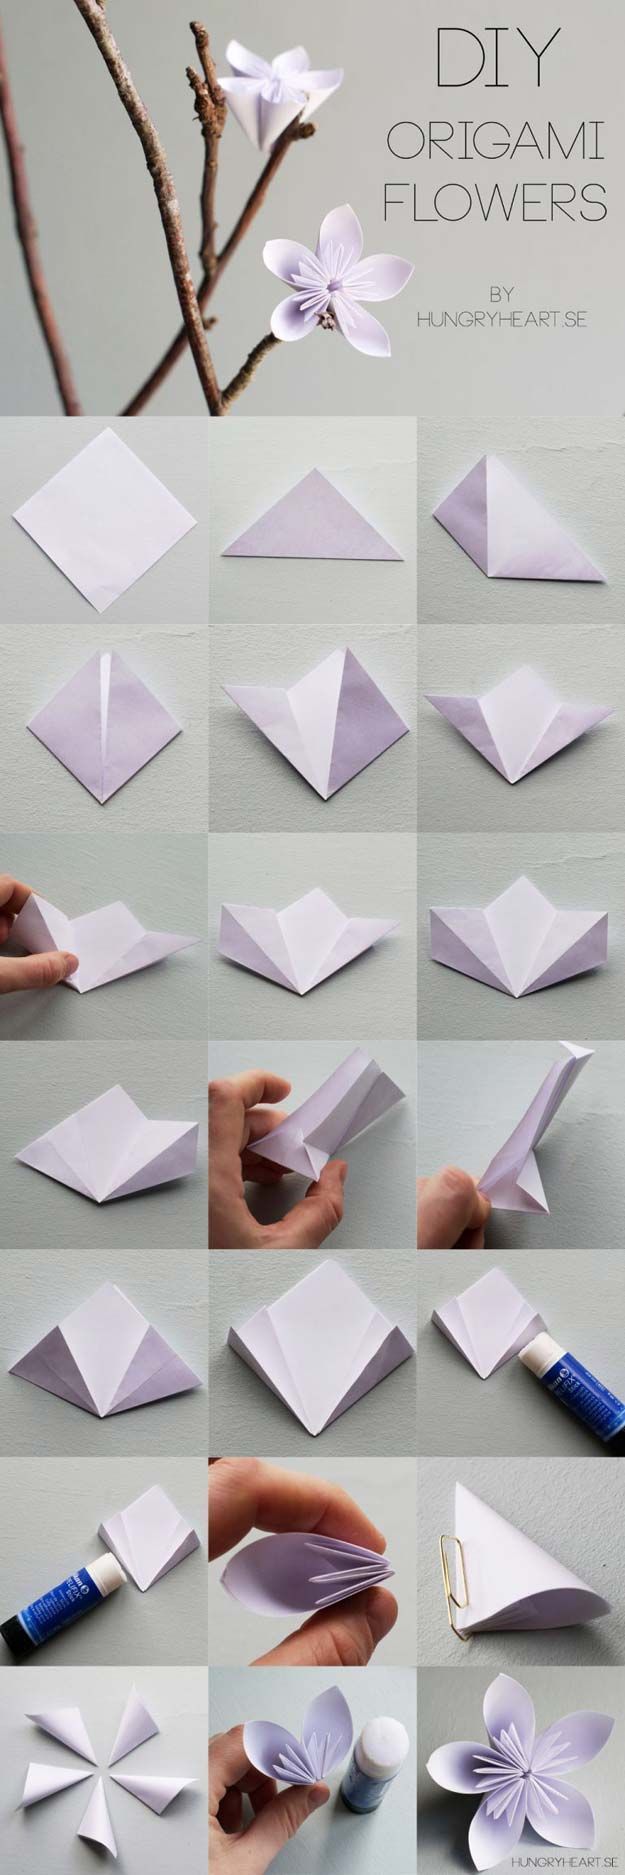 Best Origami Tutorials – Flower Origami – Easy DIY Origami Tutorial Projects for With Instructions for Flowers, Dog, Gift Box,